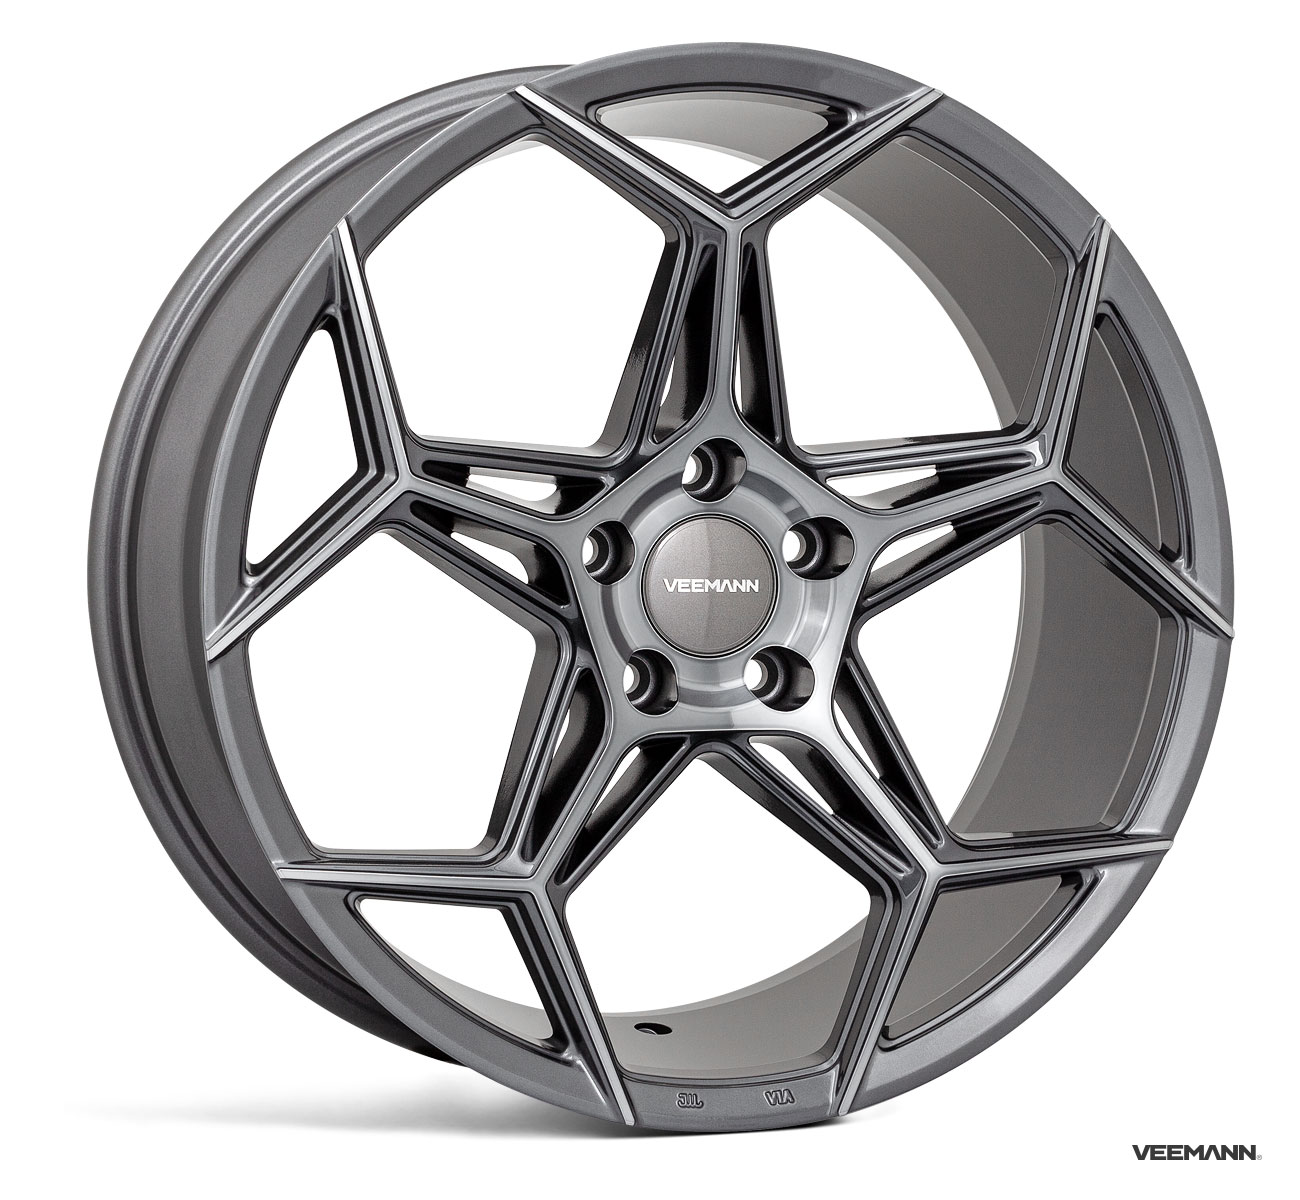 NEW 19" VEEMANN V-FS40 ALLOY WHEELS IN GRAPHITE SMOKE MACHINED WITH WIDER 9.5" REARS